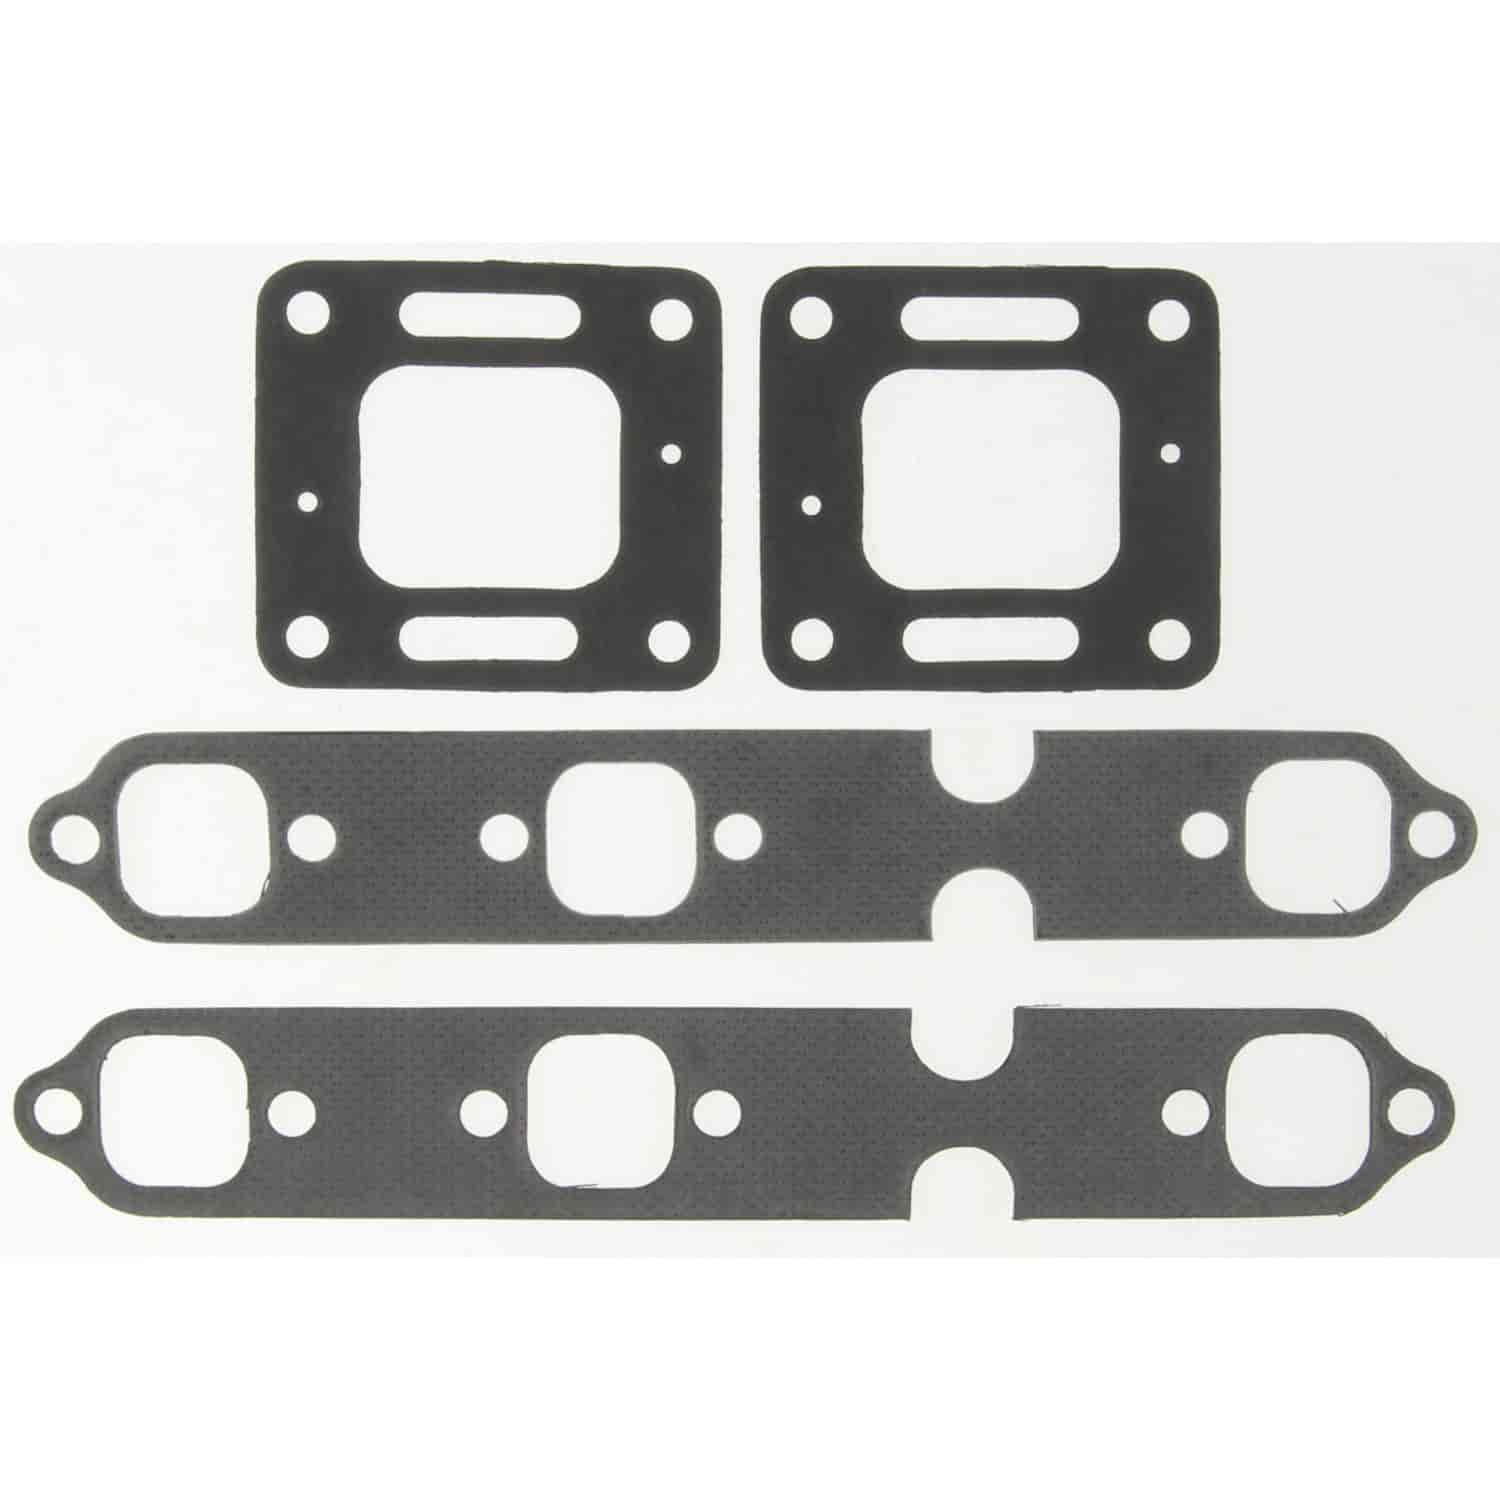 Exhaust Manifold Gasket Set Mercruiser MCM 175/185/205 With 4.3L Chevy V6